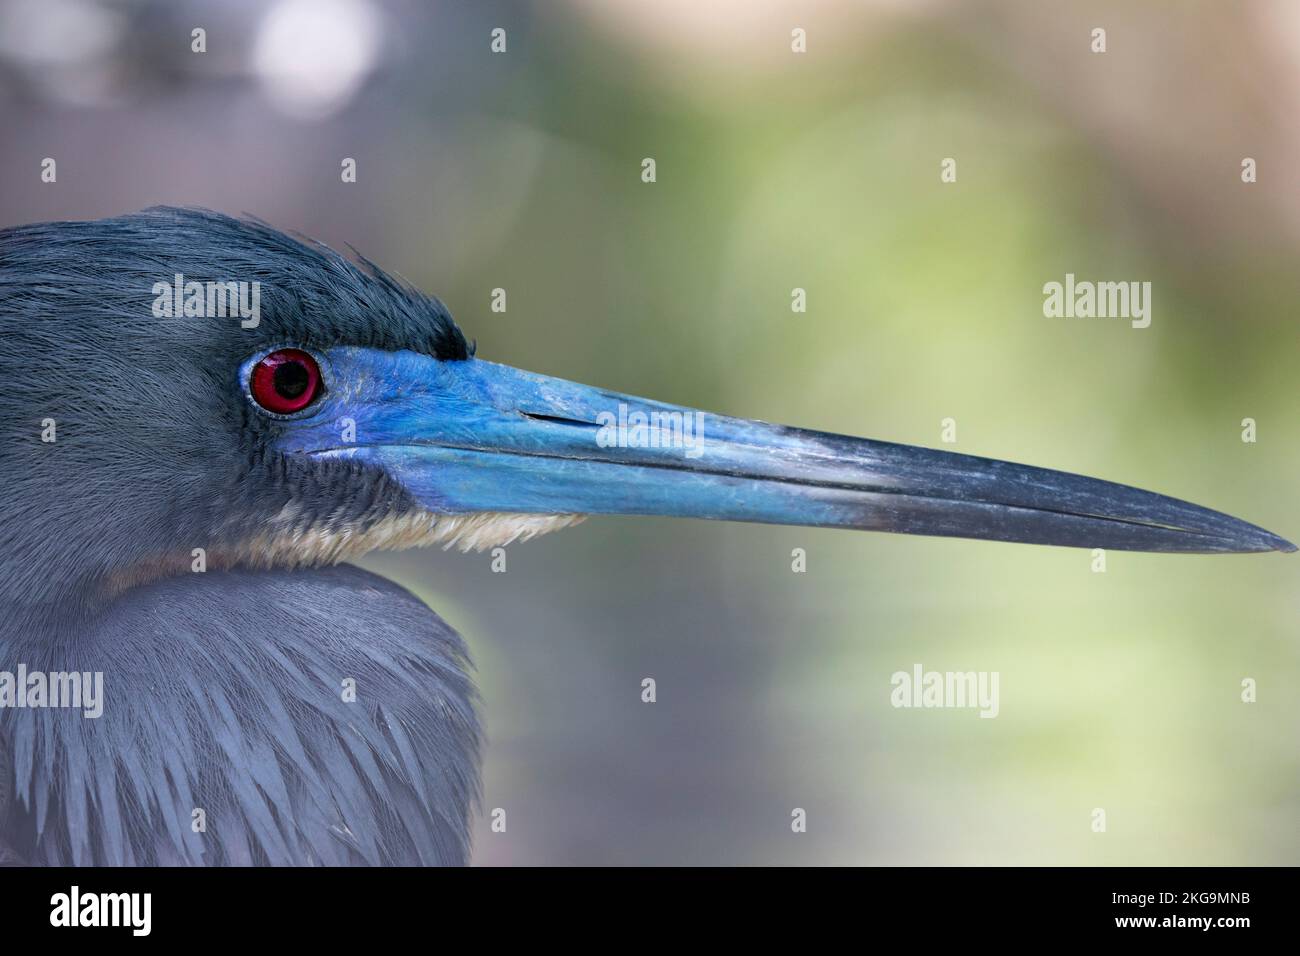 Close up horizontal portrait of beautiful eye and blue hues of beak and plumage of heron in St. Augustine, Florida. Copy space in bokeh background. Stock Photo